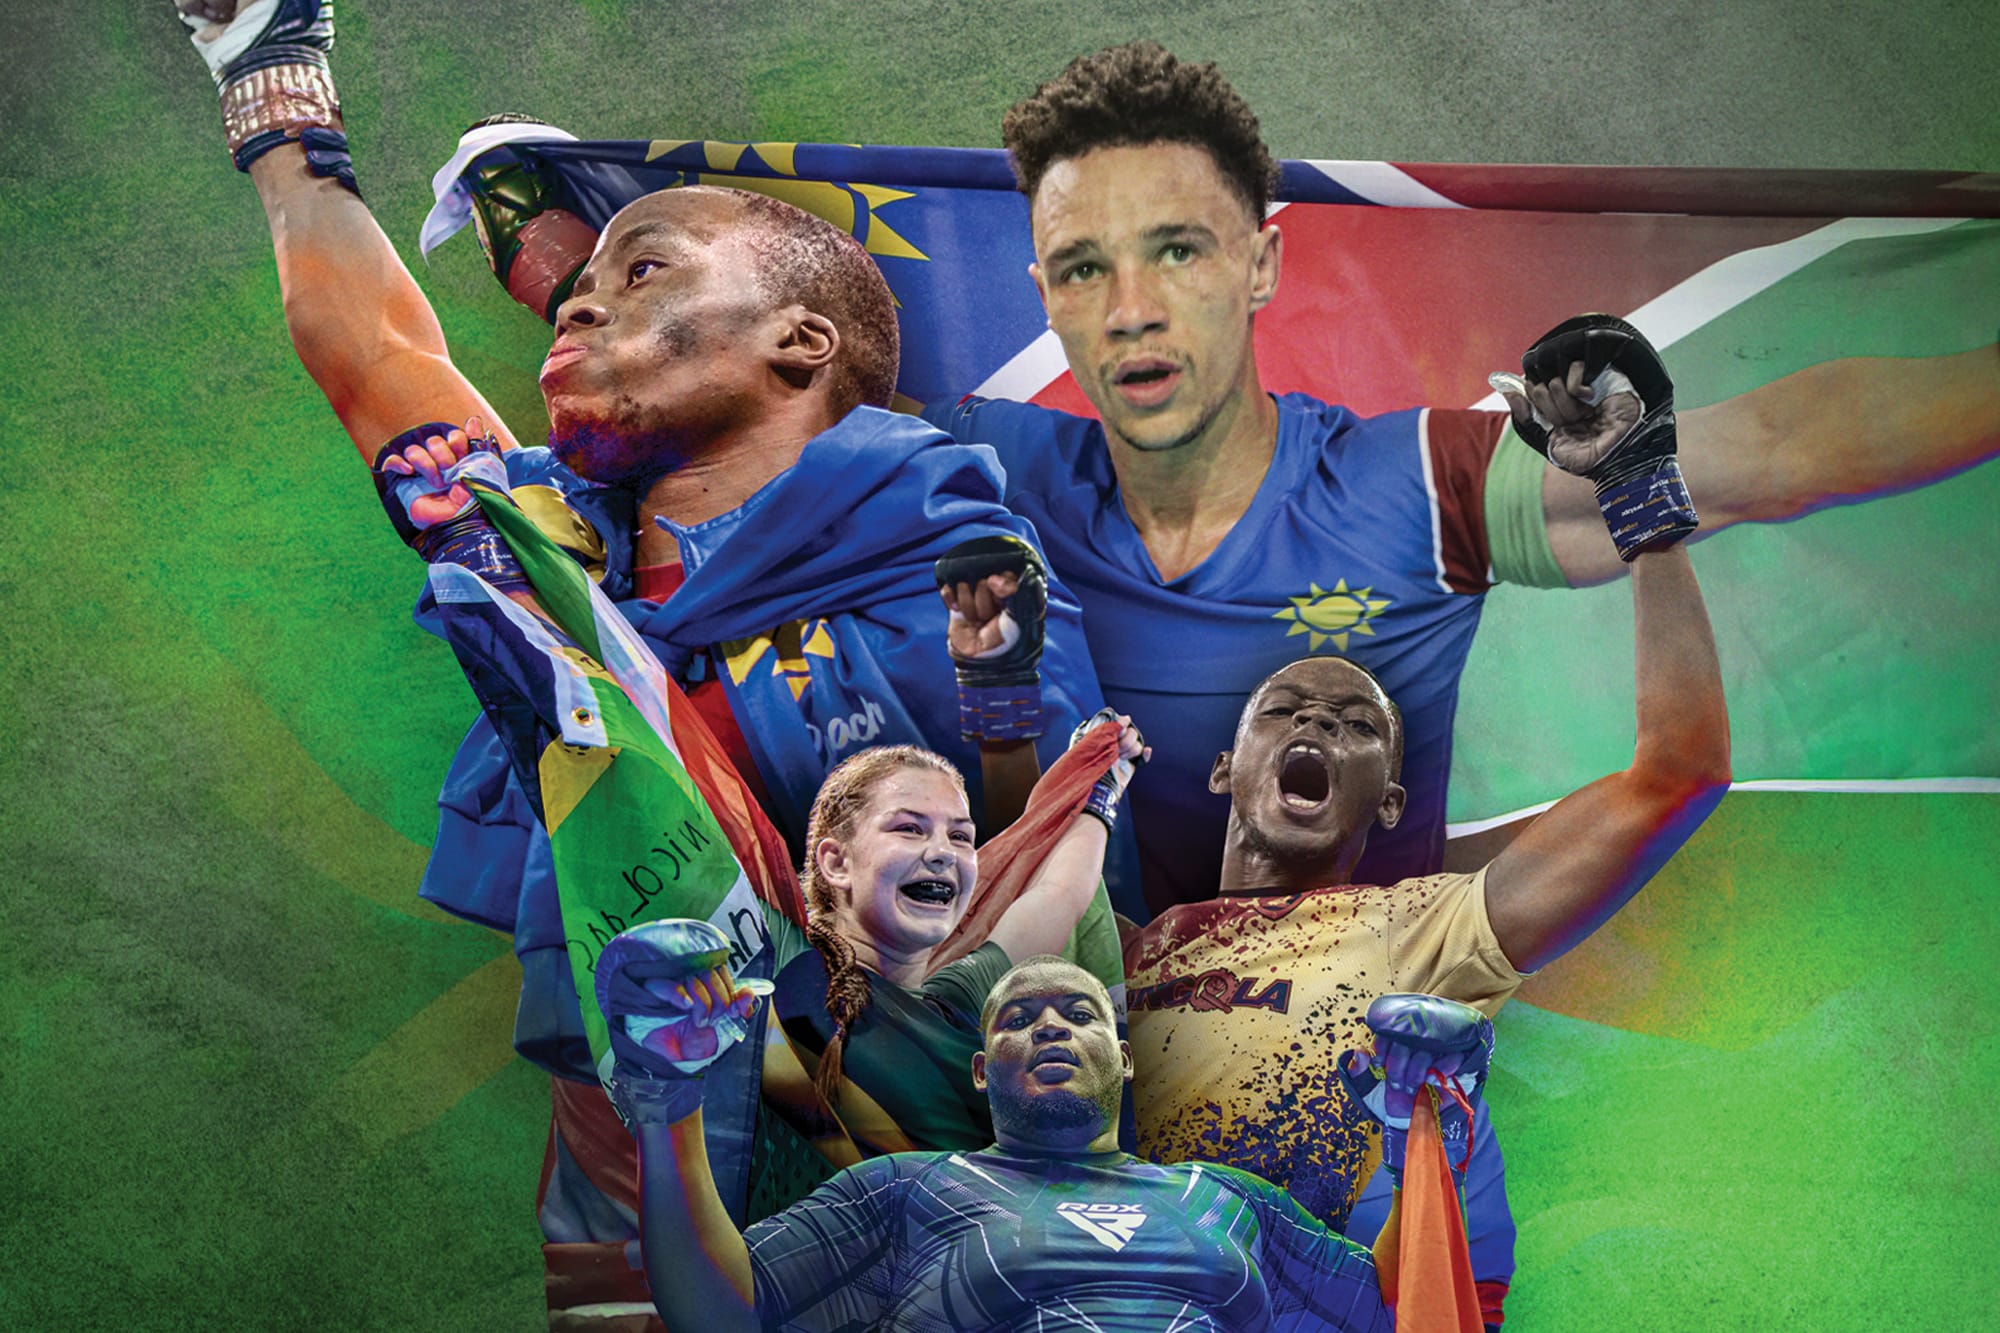 Calling all future African MMA stars! Registration for the 2024 African IMMAF Championships is now open